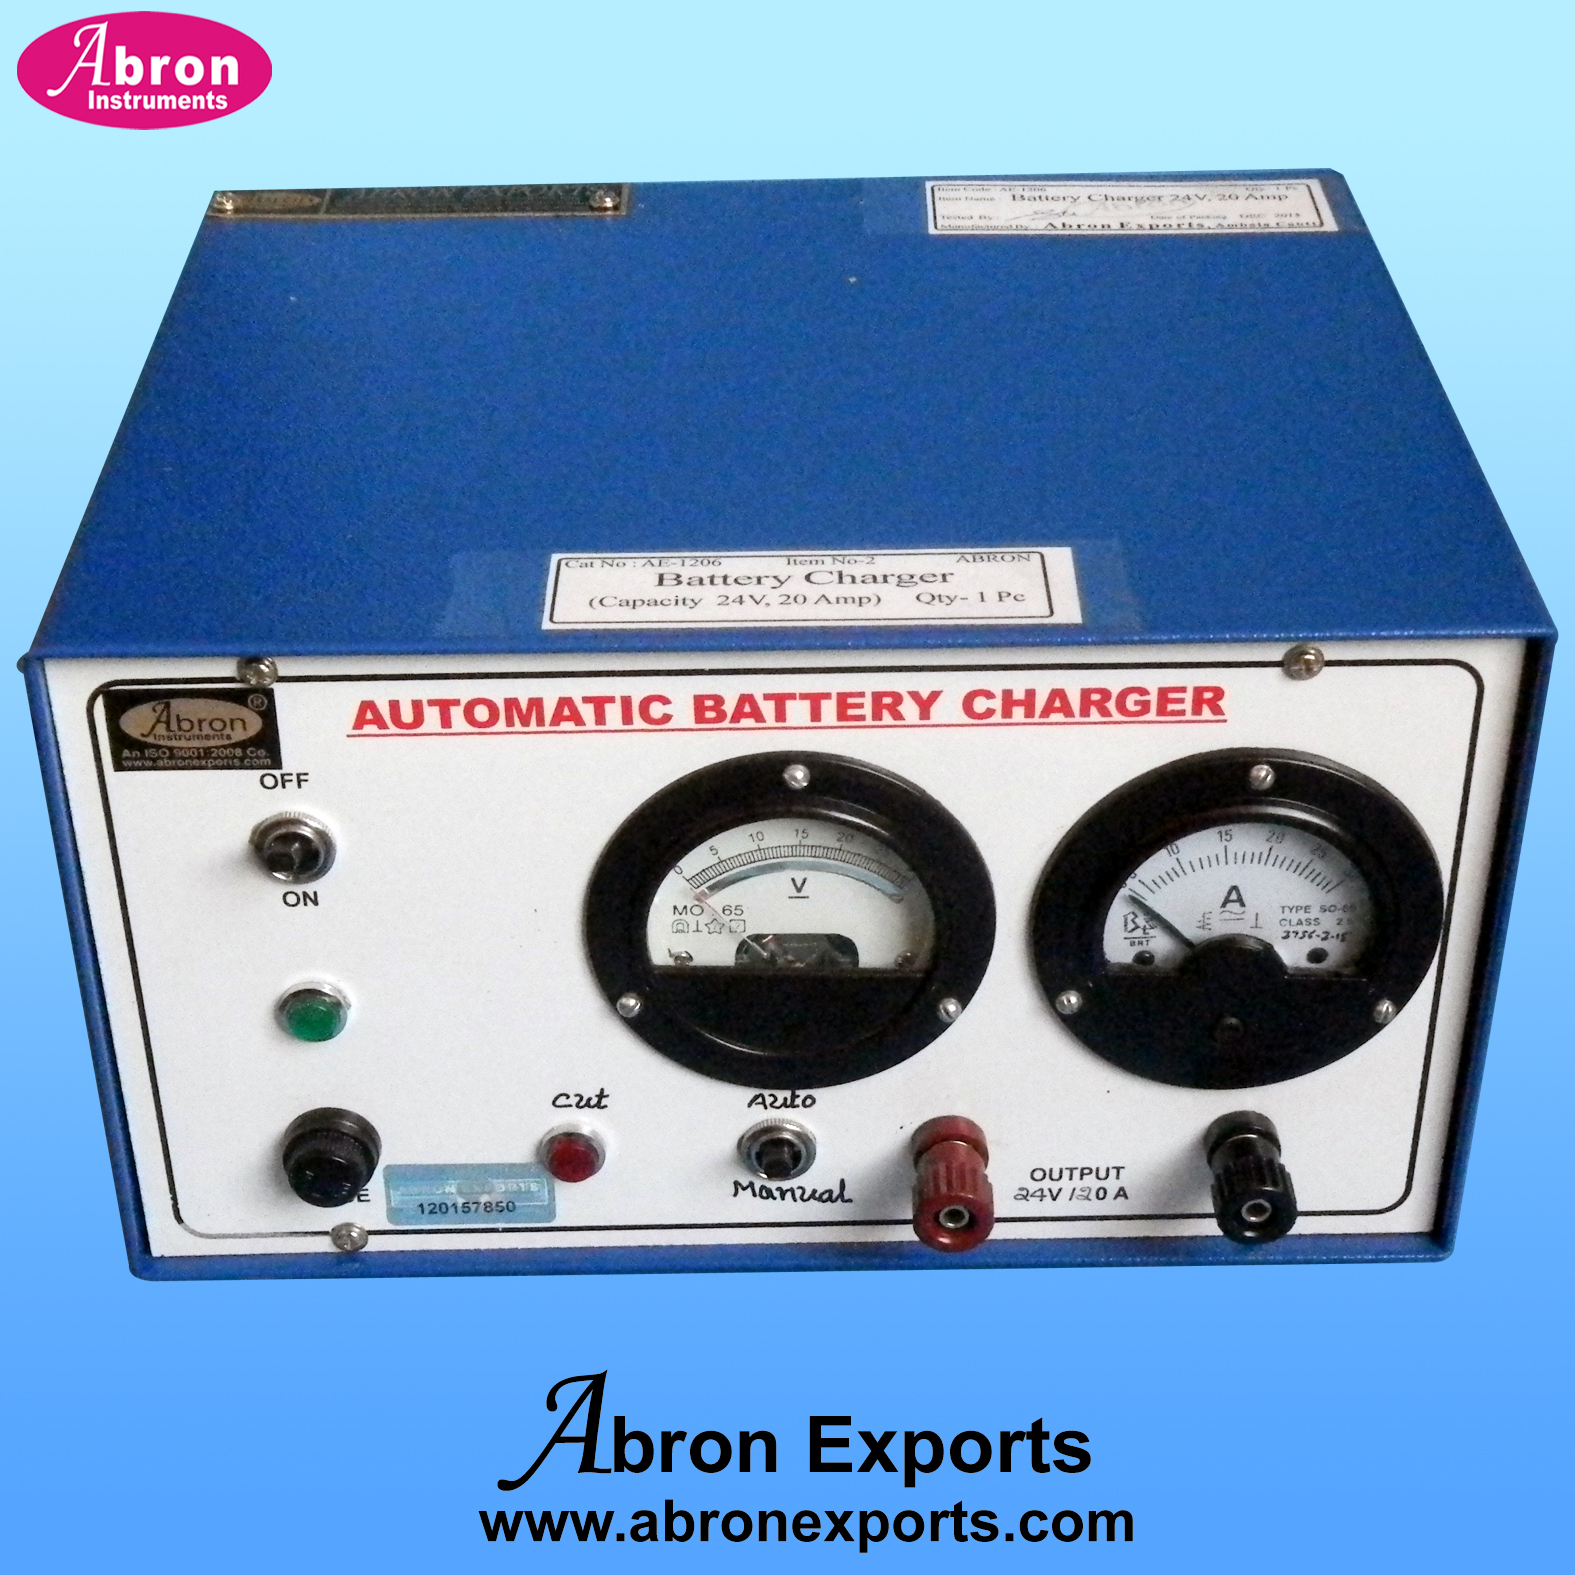 Battery Charger Automatic 24V 20 AMP Adjusts Voltage And Current as Per Batteries to be Charged AE-1207A24